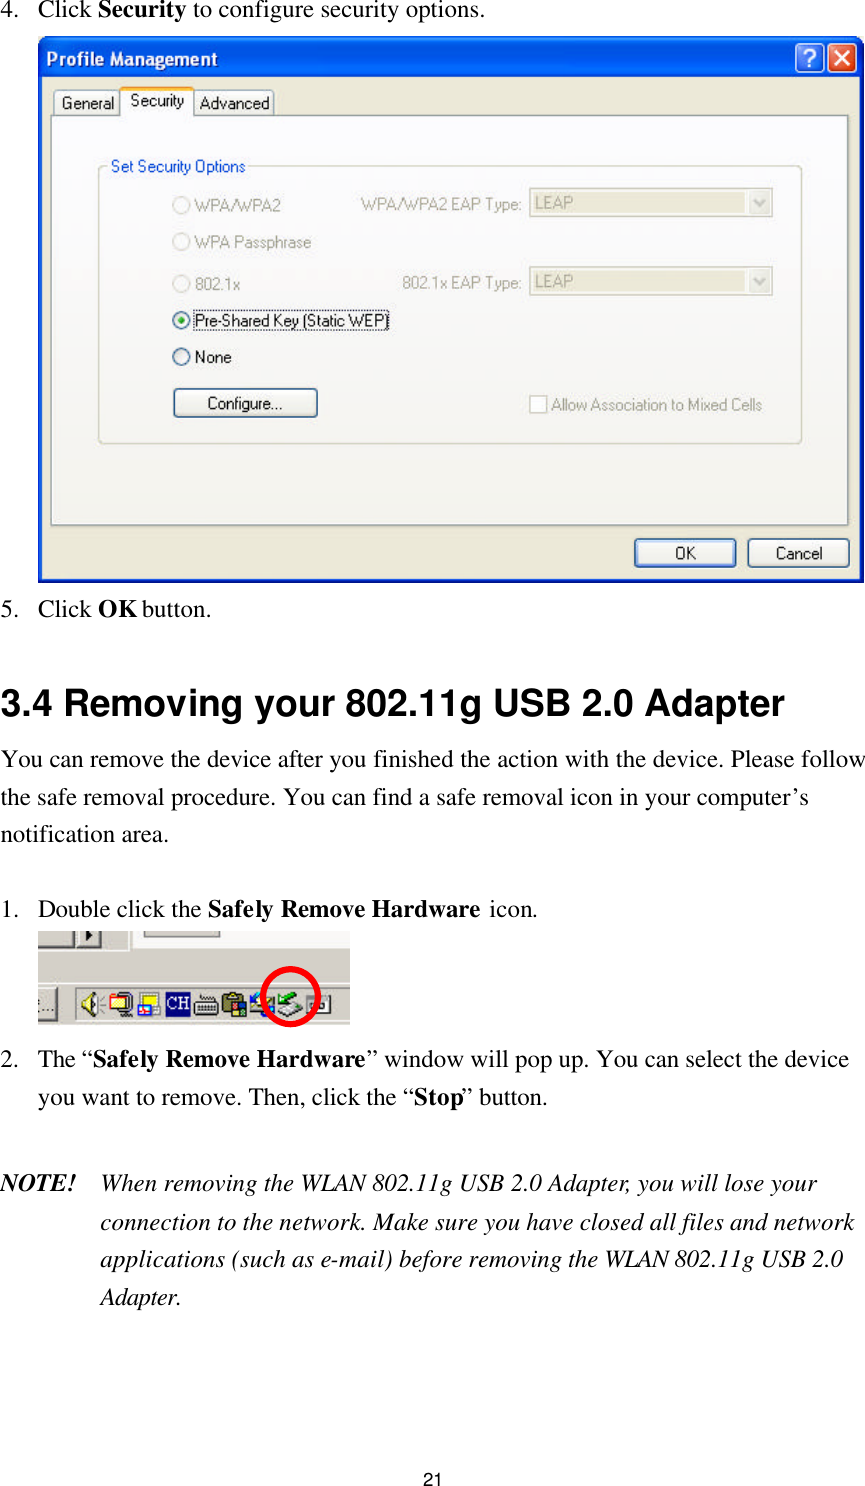  21 4. Click Security to configure security options.  5. Click OK button.  3.4 Removing your 802.11g USB 2.0 Adapter   You can remove the device after you finished the action with the device. Please follow the safe removal procedure. You can find a safe removal icon in your computer’s notification area.    1. Double click the Safely Remove Hardware icon.  2. The “Safely Remove Hardware” window will pop up. You can select the device you want to remove. Then, click the “Stop” button.  NOTE! When removing the WLAN 802.11g USB 2.0 Adapter, you will lose your connection to the network. Make sure you have closed all files and network applications (such as e-mail) before removing the WLAN 802.11g USB 2.0 Adapter.    